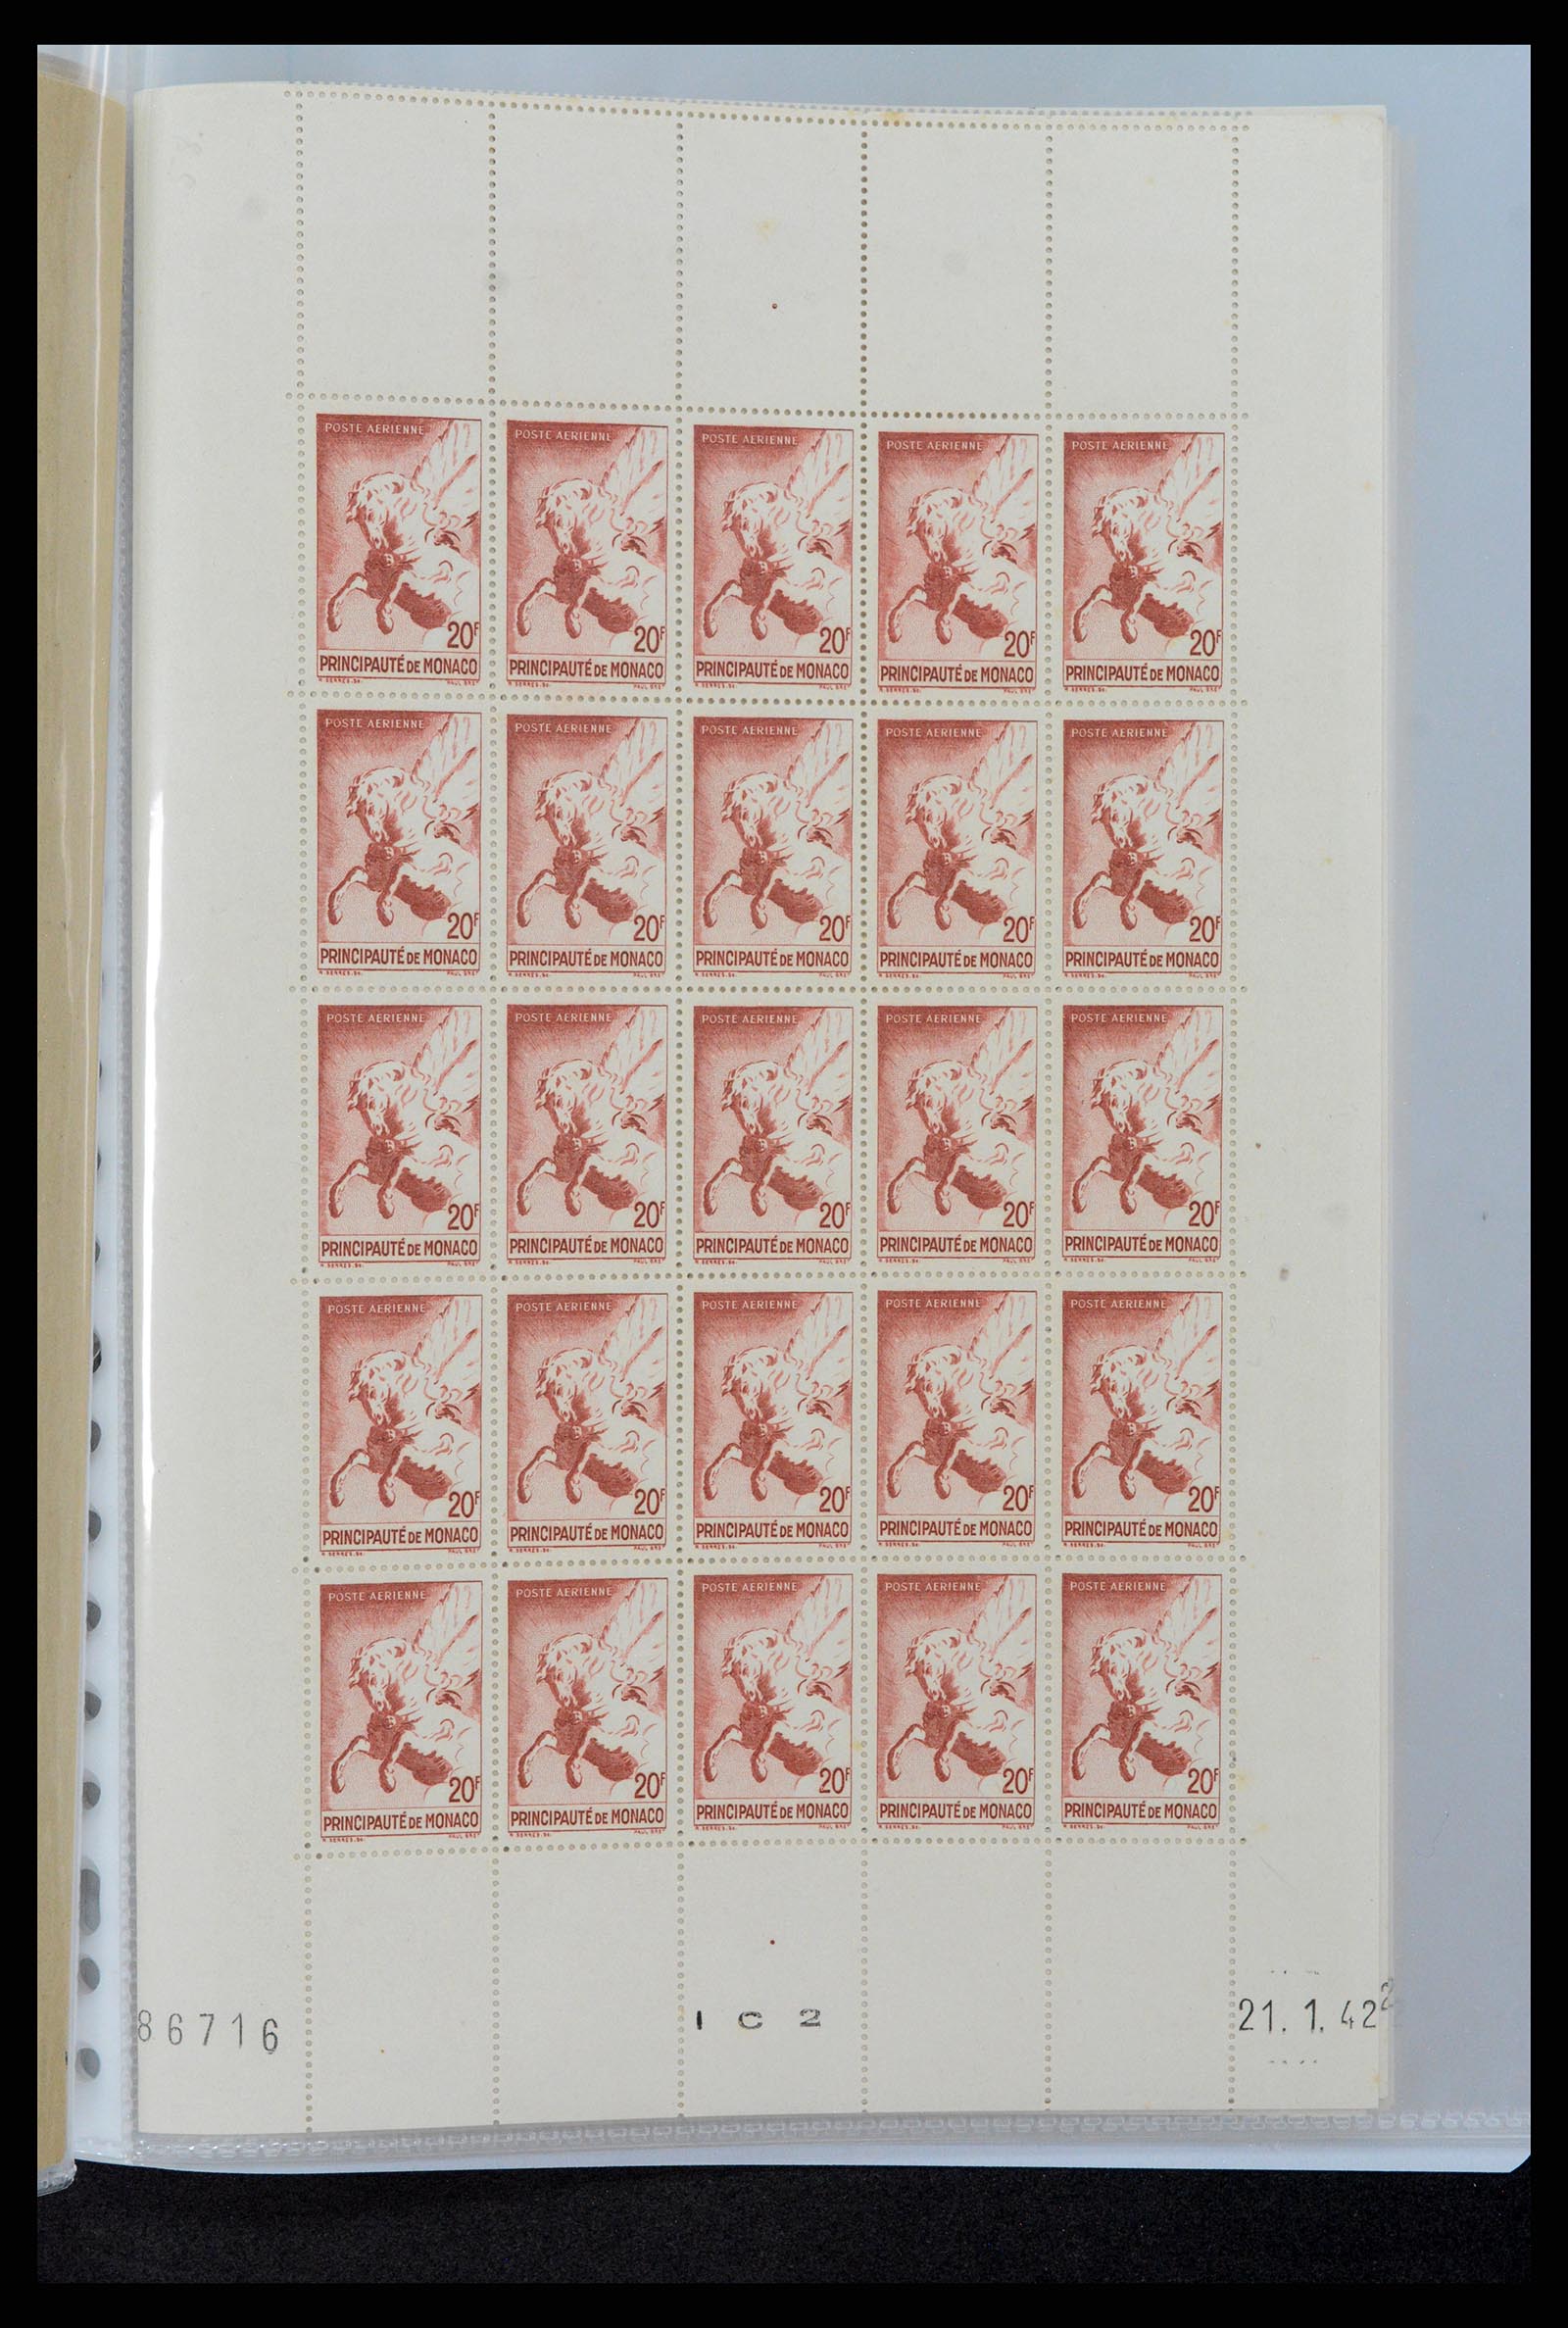 37984 052 - Stamp collection 37984 Monaco better issues 1942-1982.